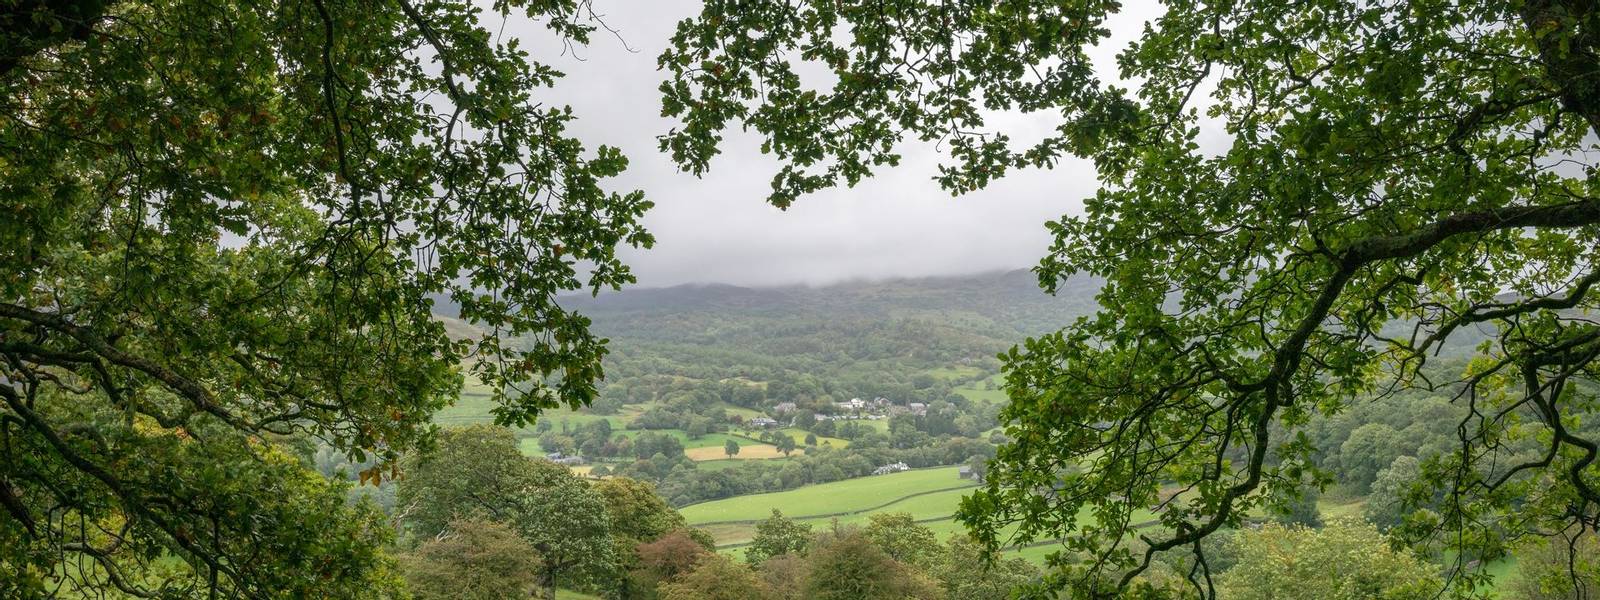 Landscape image of view from Precipice Walk in Snowdonia overlooking Barmouth and Coed-y-Brenin forest during rainy afternoo…